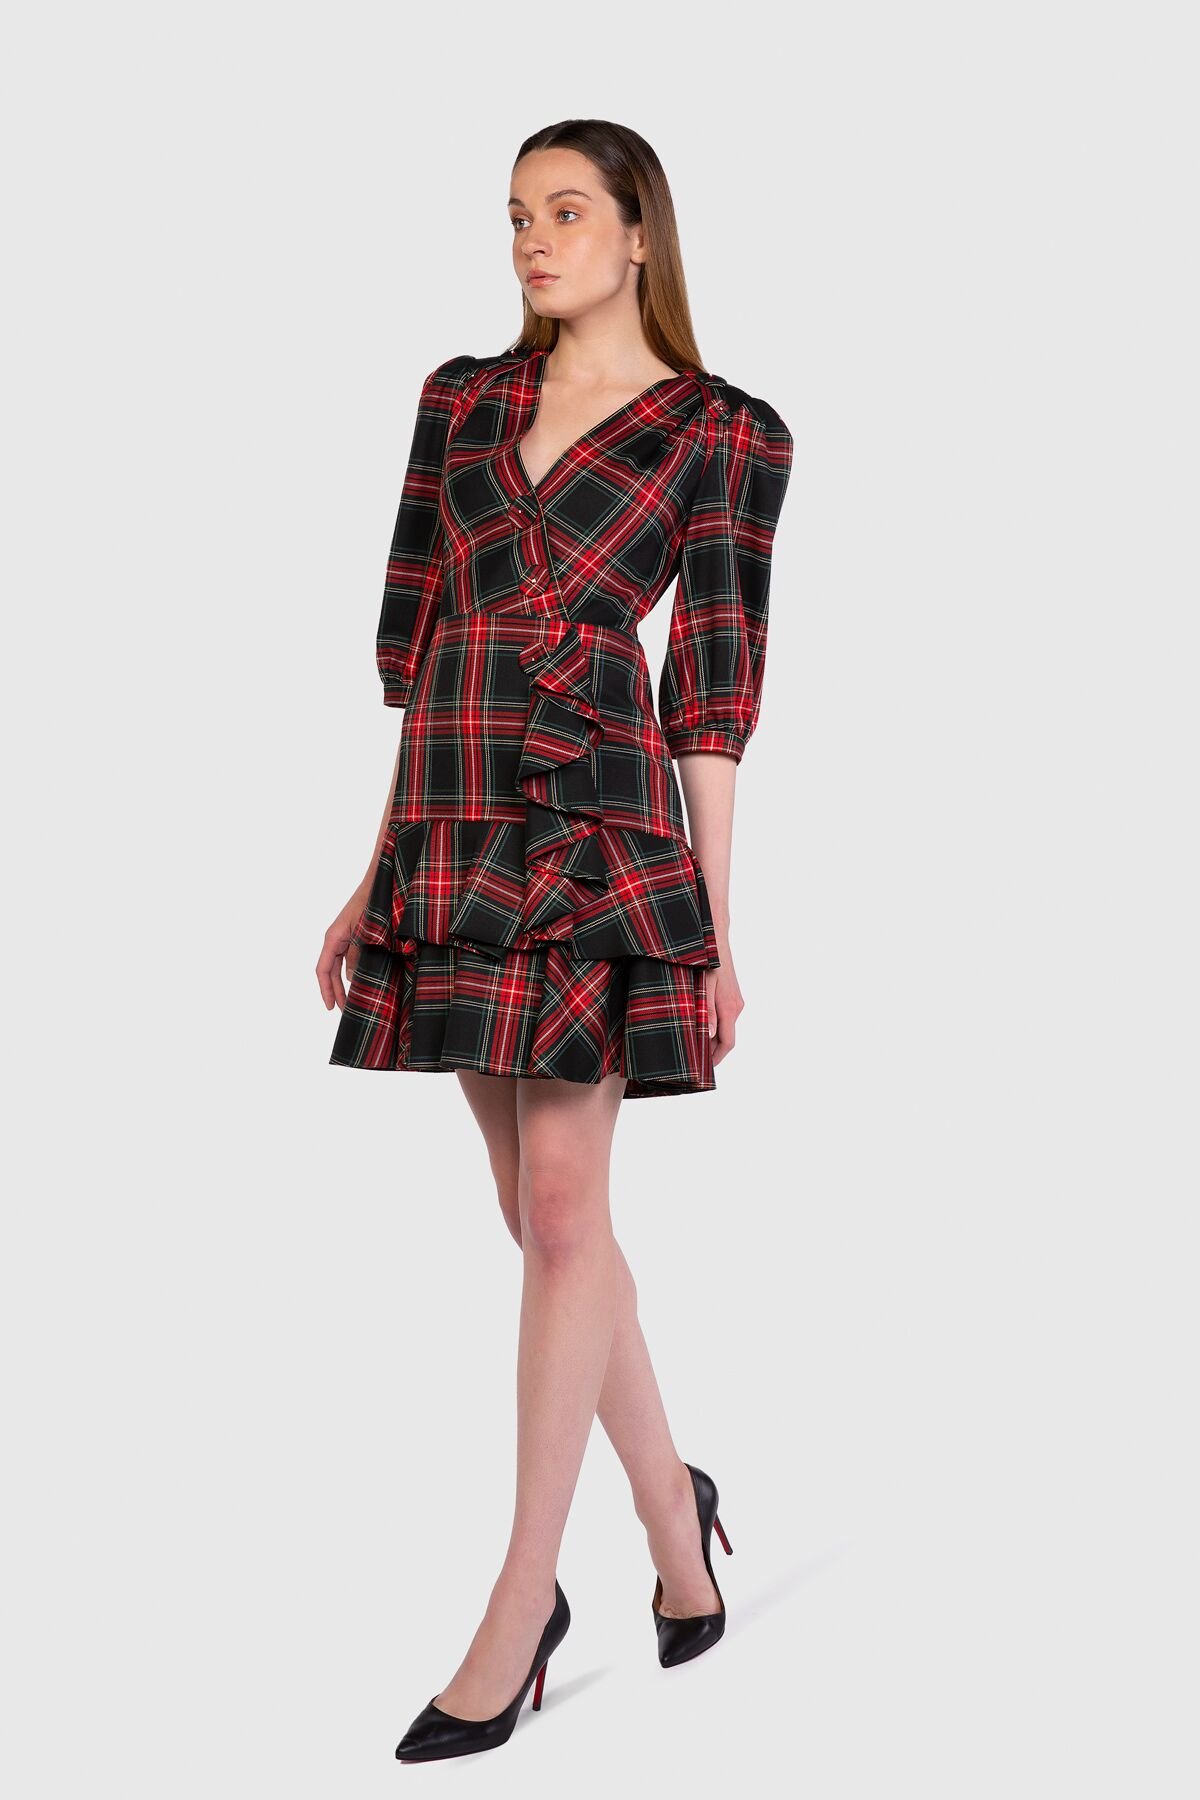 Red Plaid Dress With Ruffle Sleeves And Flounces Detail